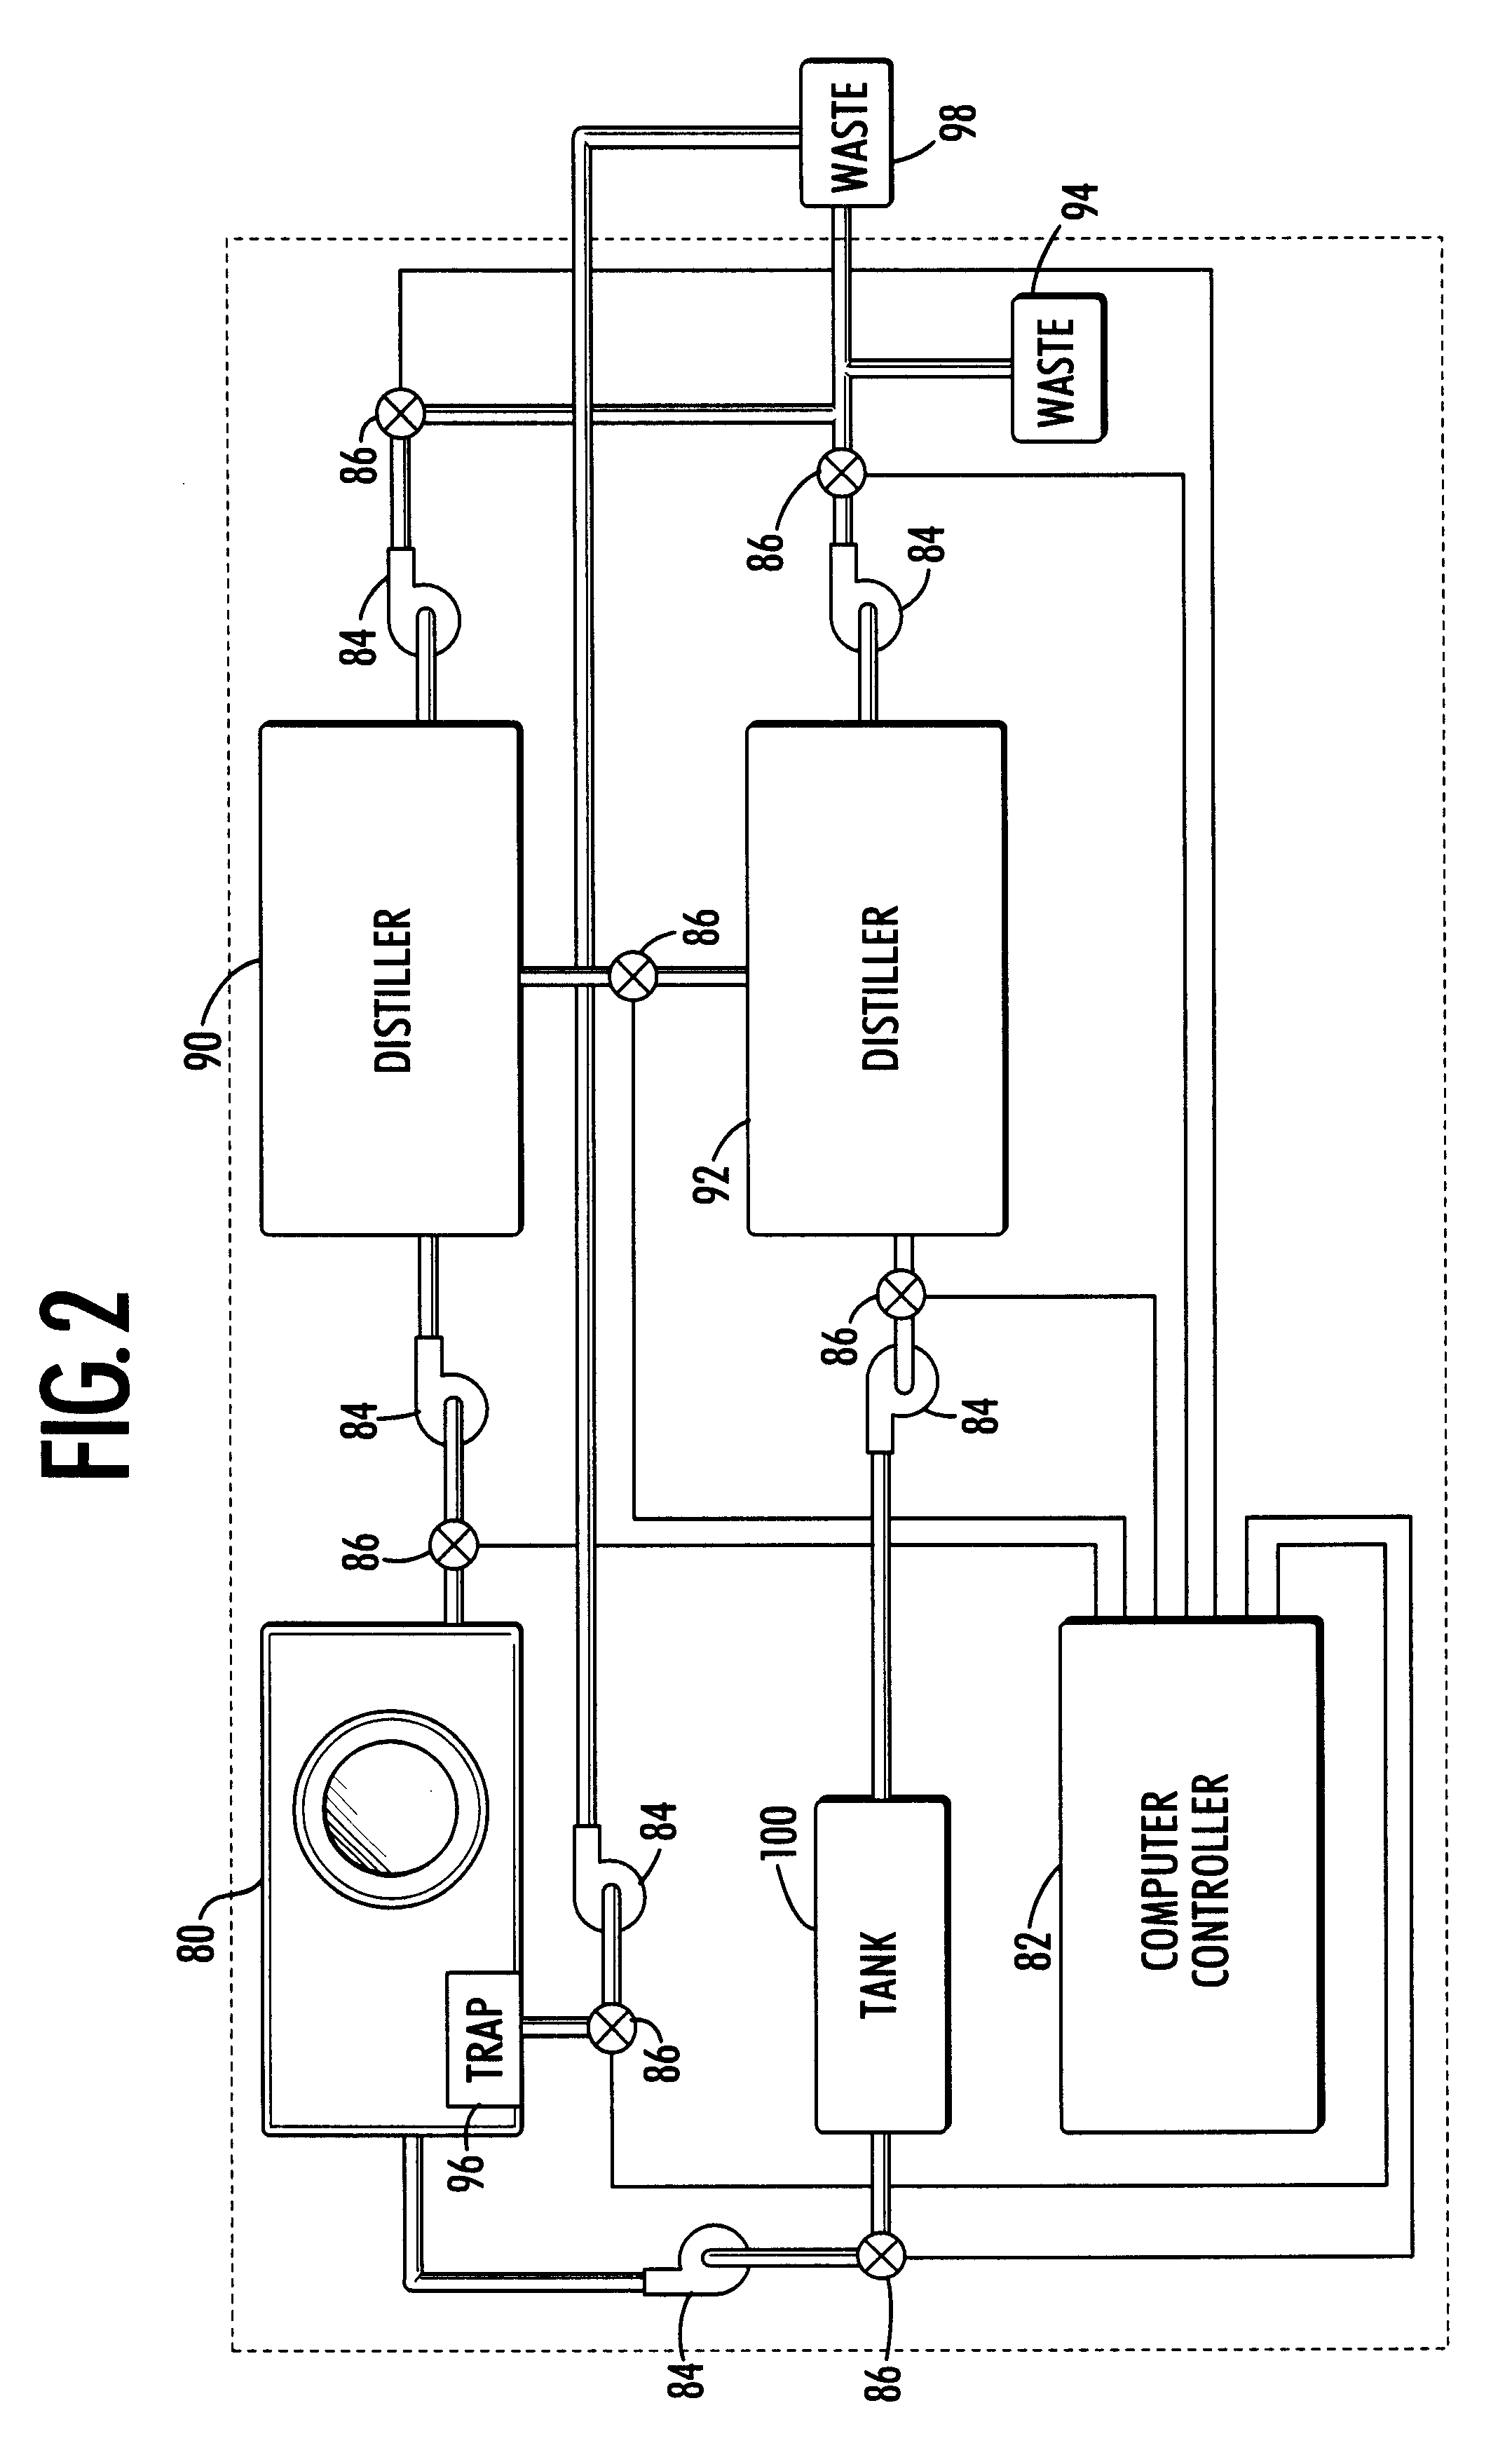 Method and apparatus for cleaning oil absorbent materials